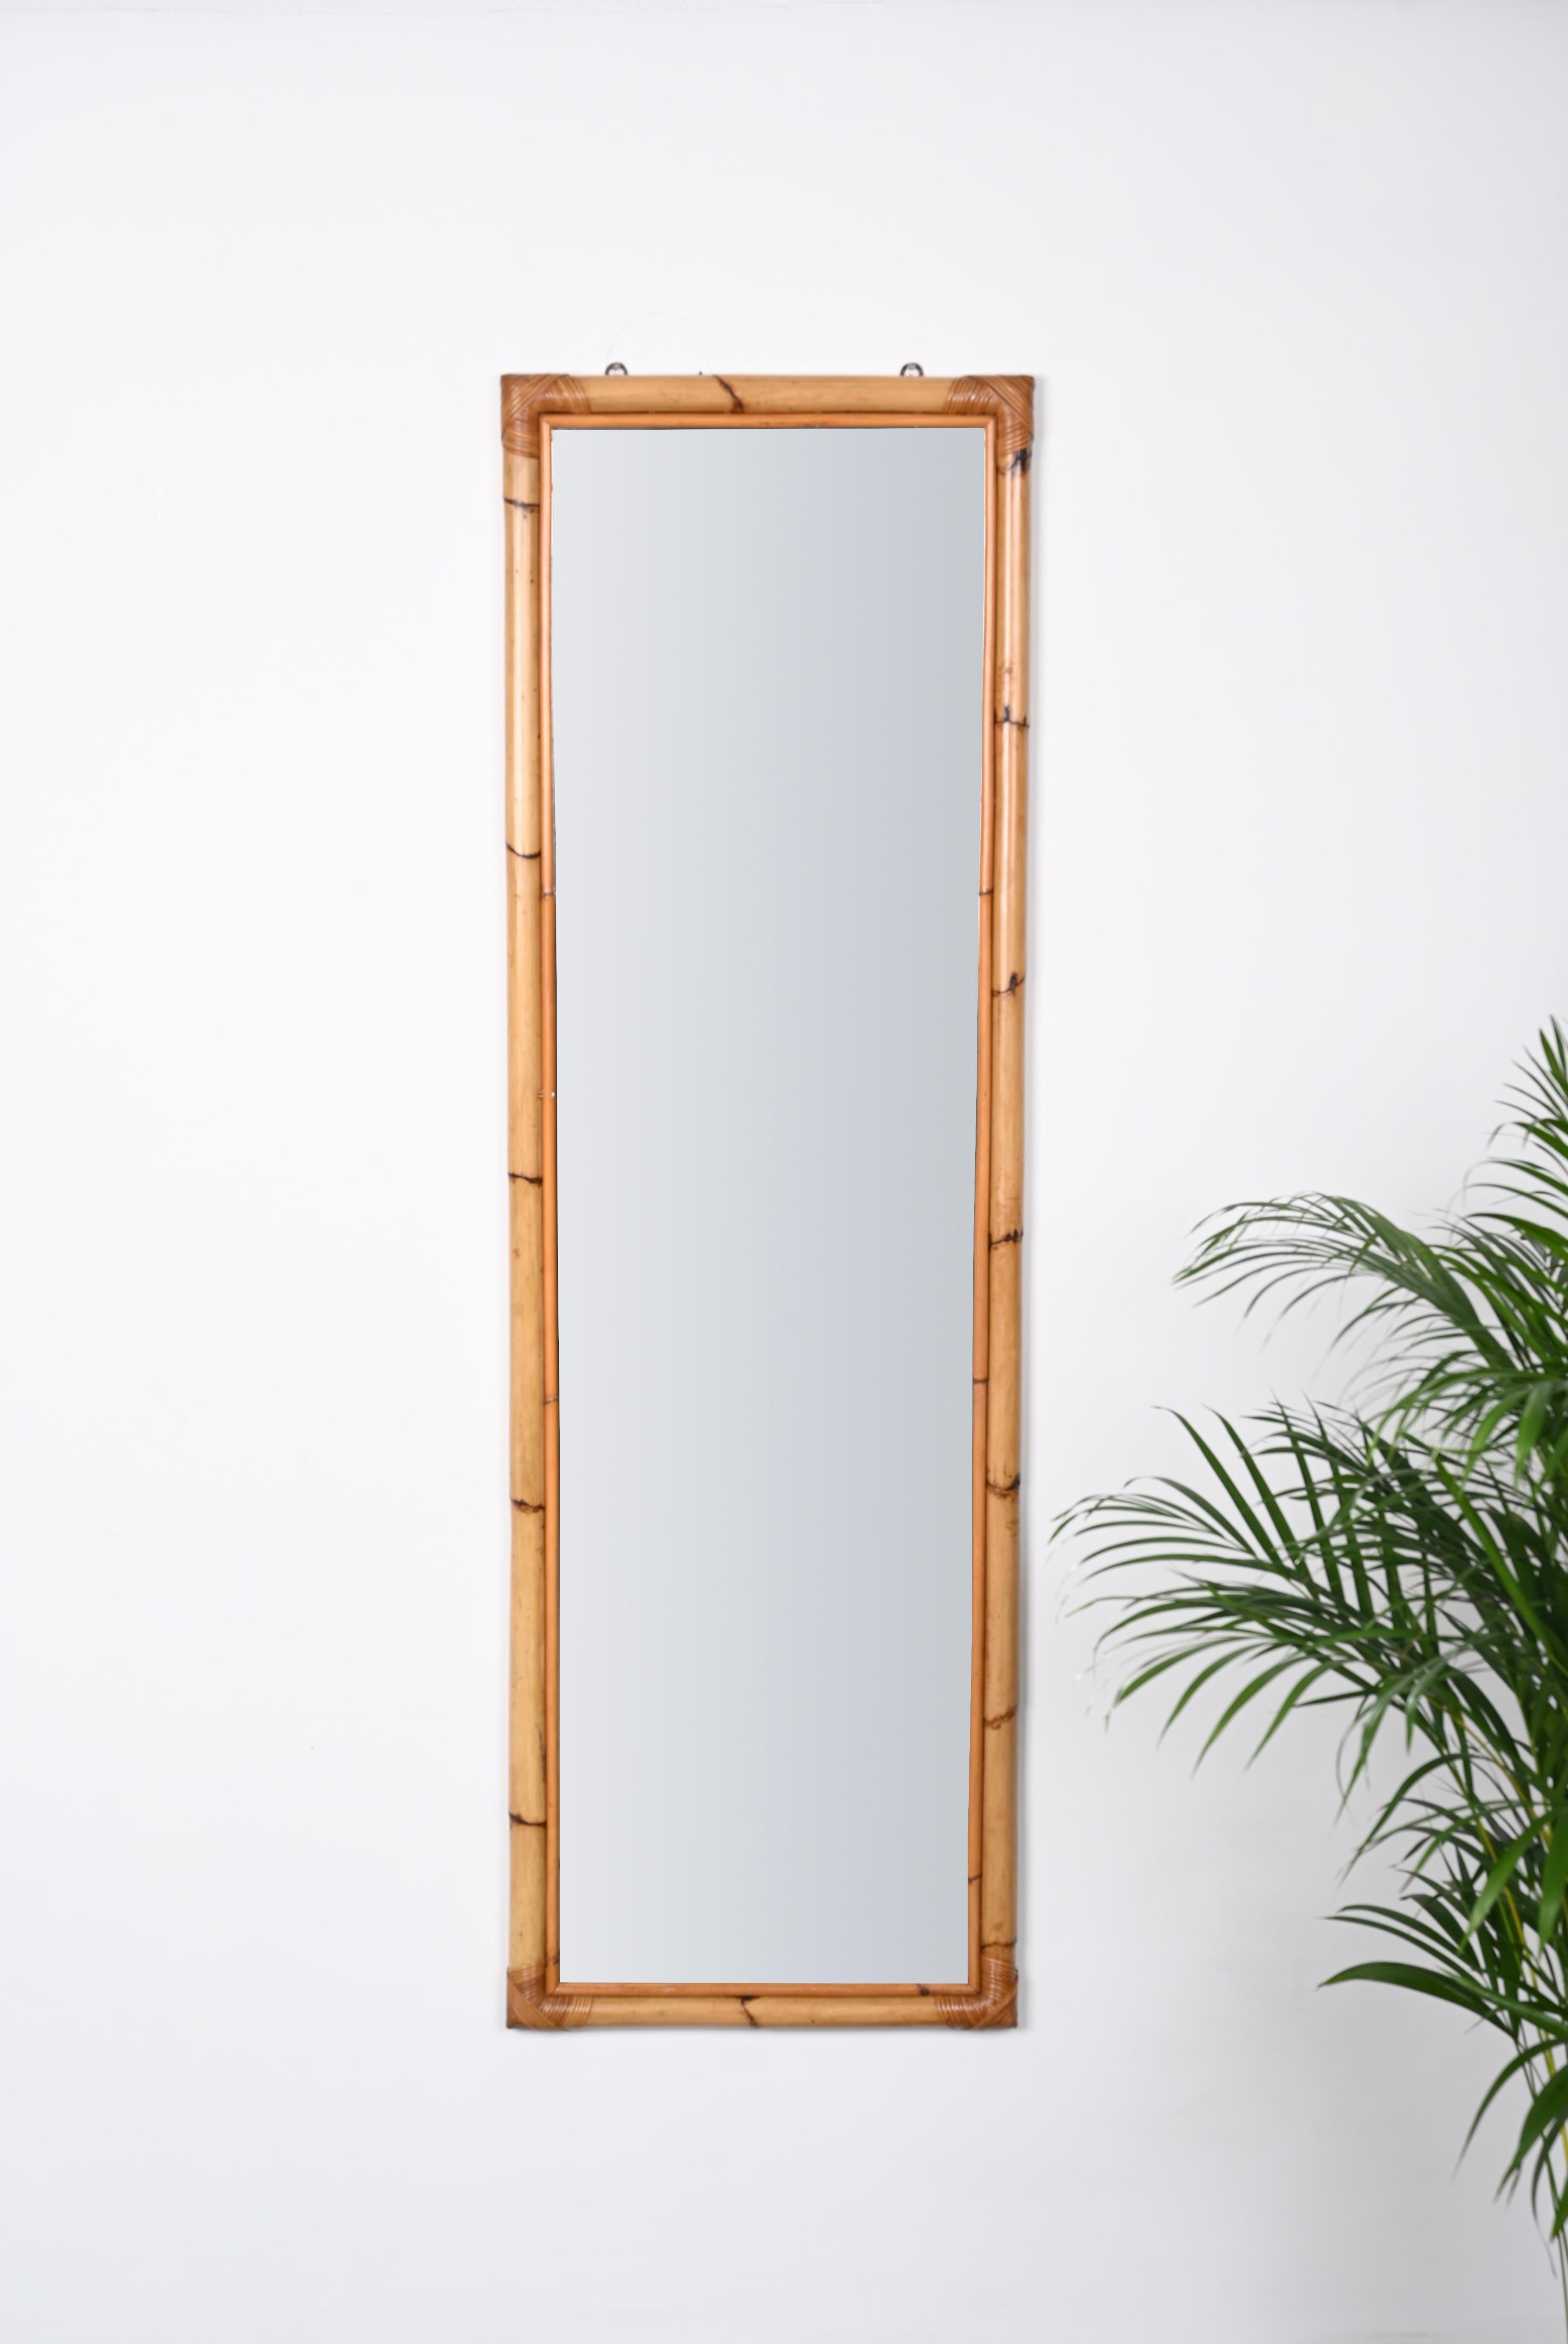 Midcentury Rectangular Mirror with Bamboo and Rattan Frame, Italy, 1970s For Sale 4